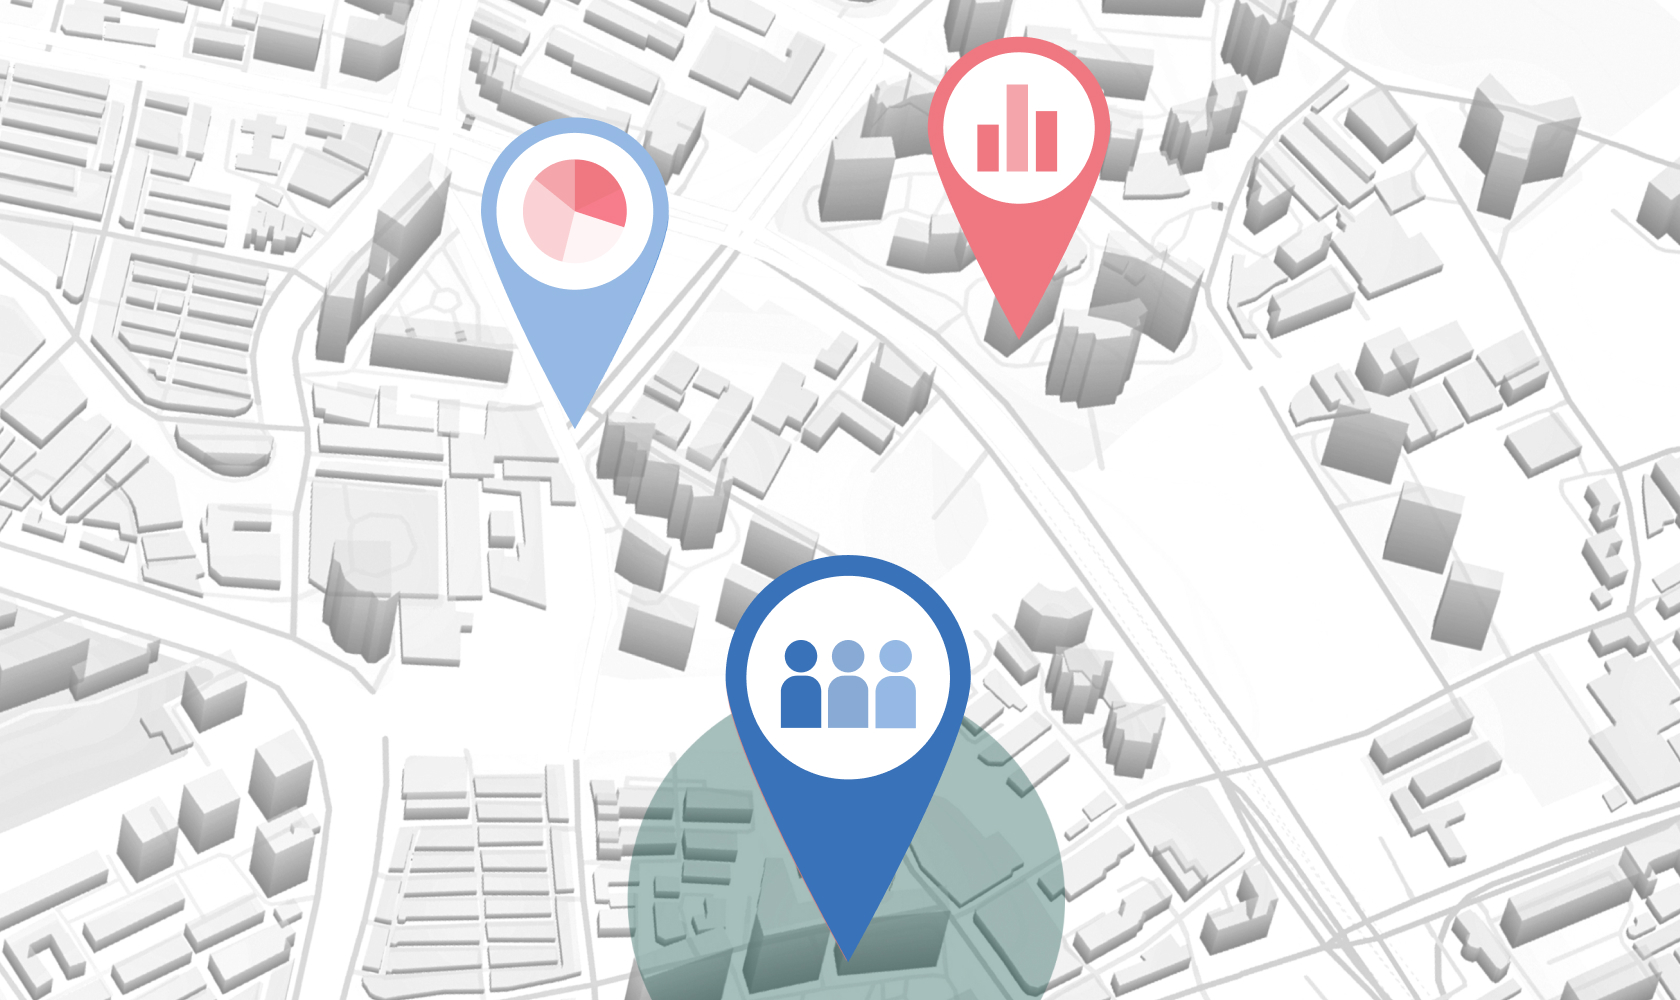 Data points are pinned to a map to reveal insights and opportunities for marketing.